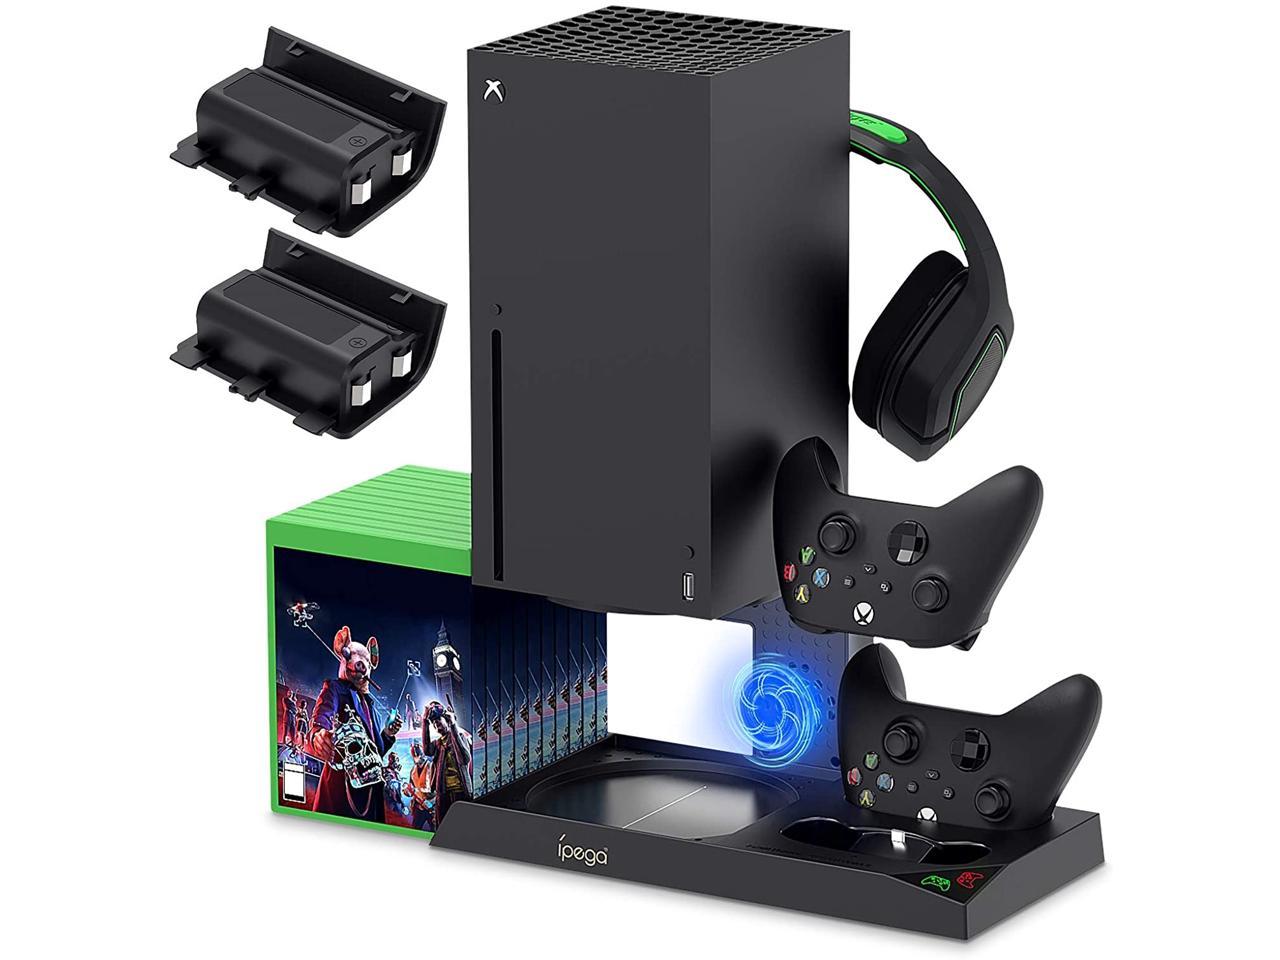 Vertical Stand with Cooling Fan for Xbox Series X, YUANHOT